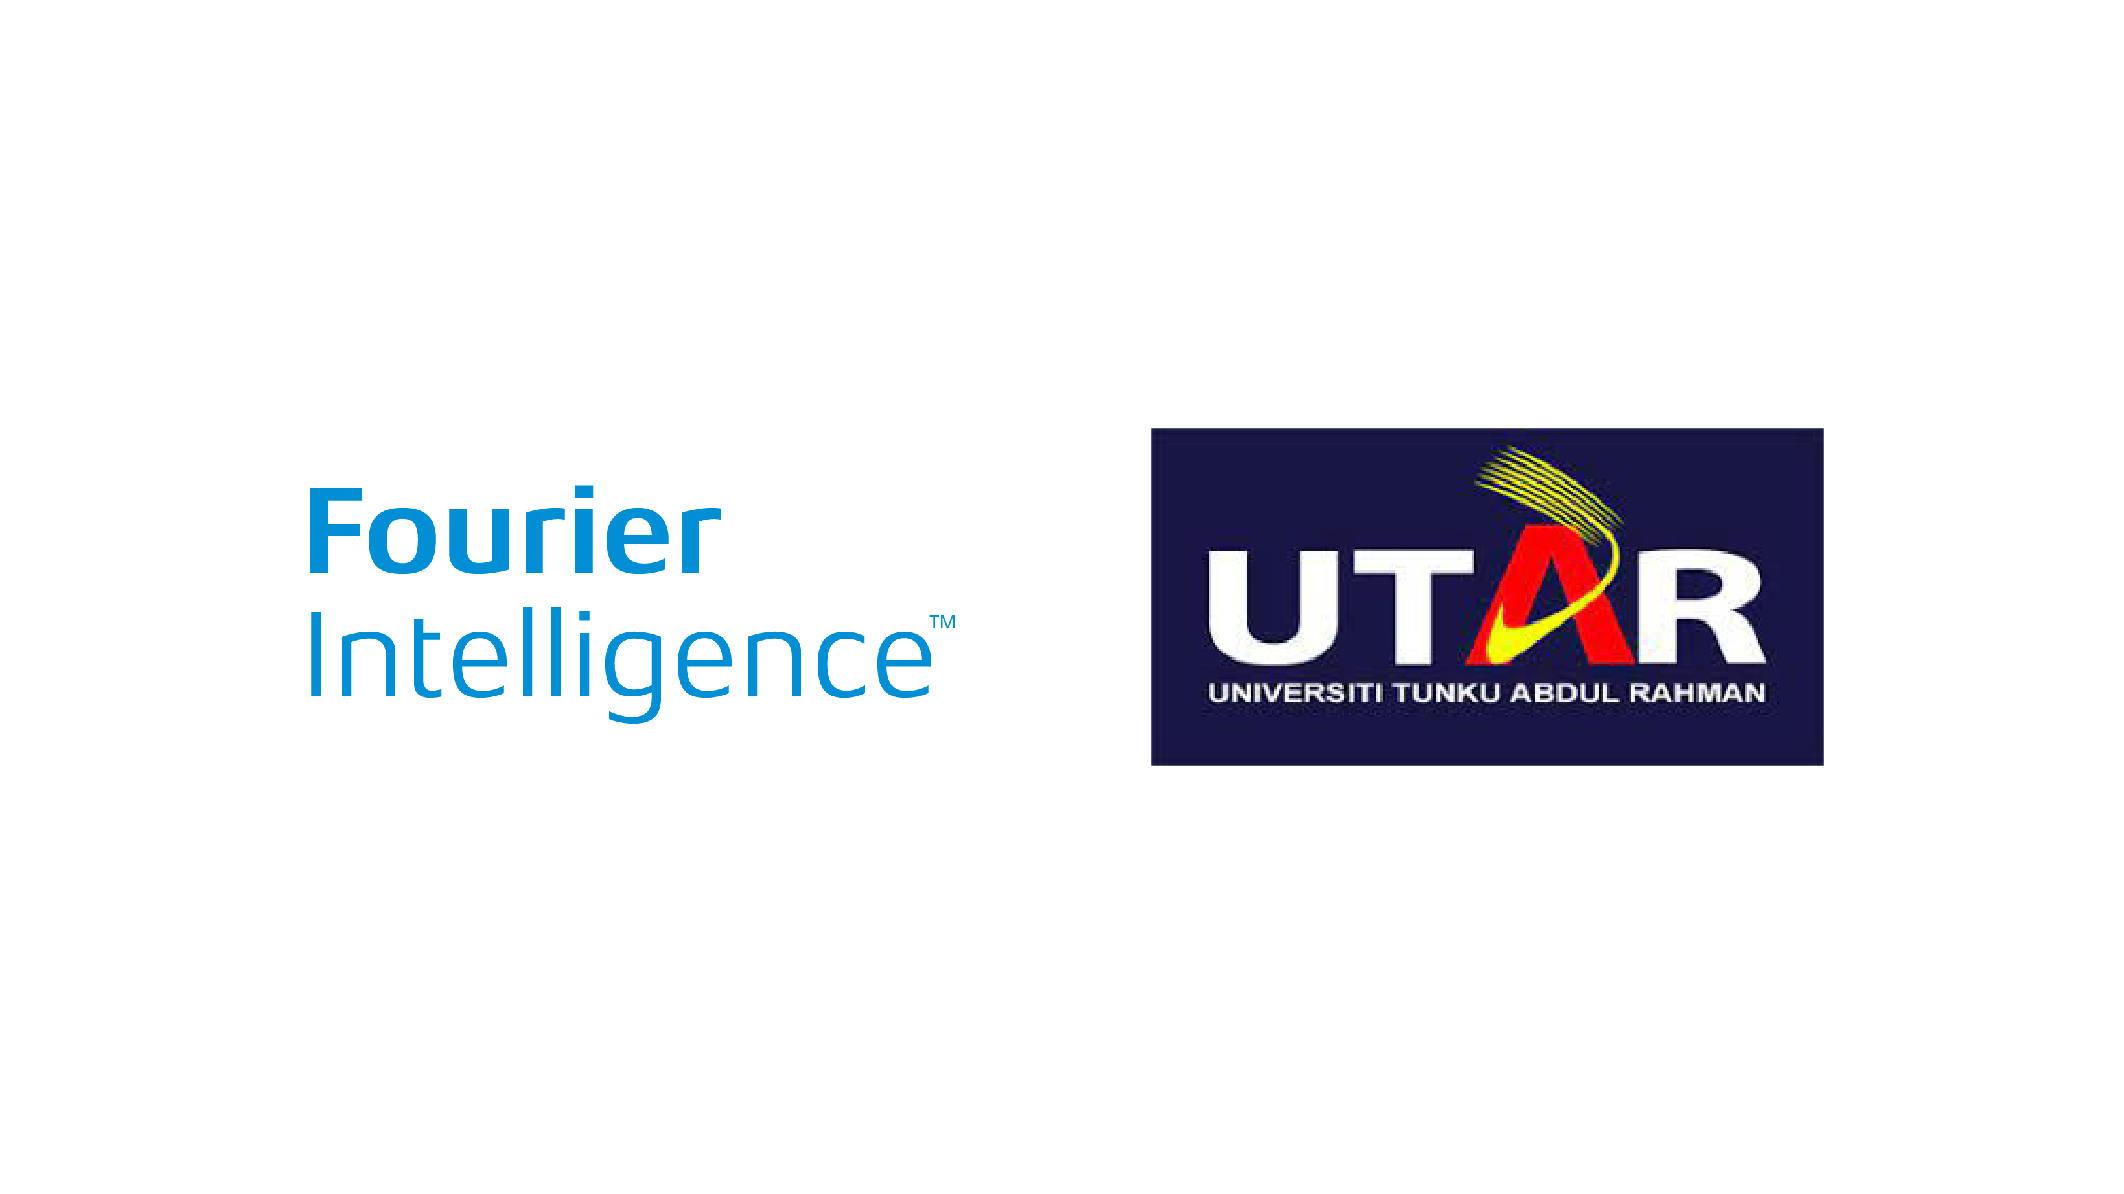 UTAR and Fourier Intellience